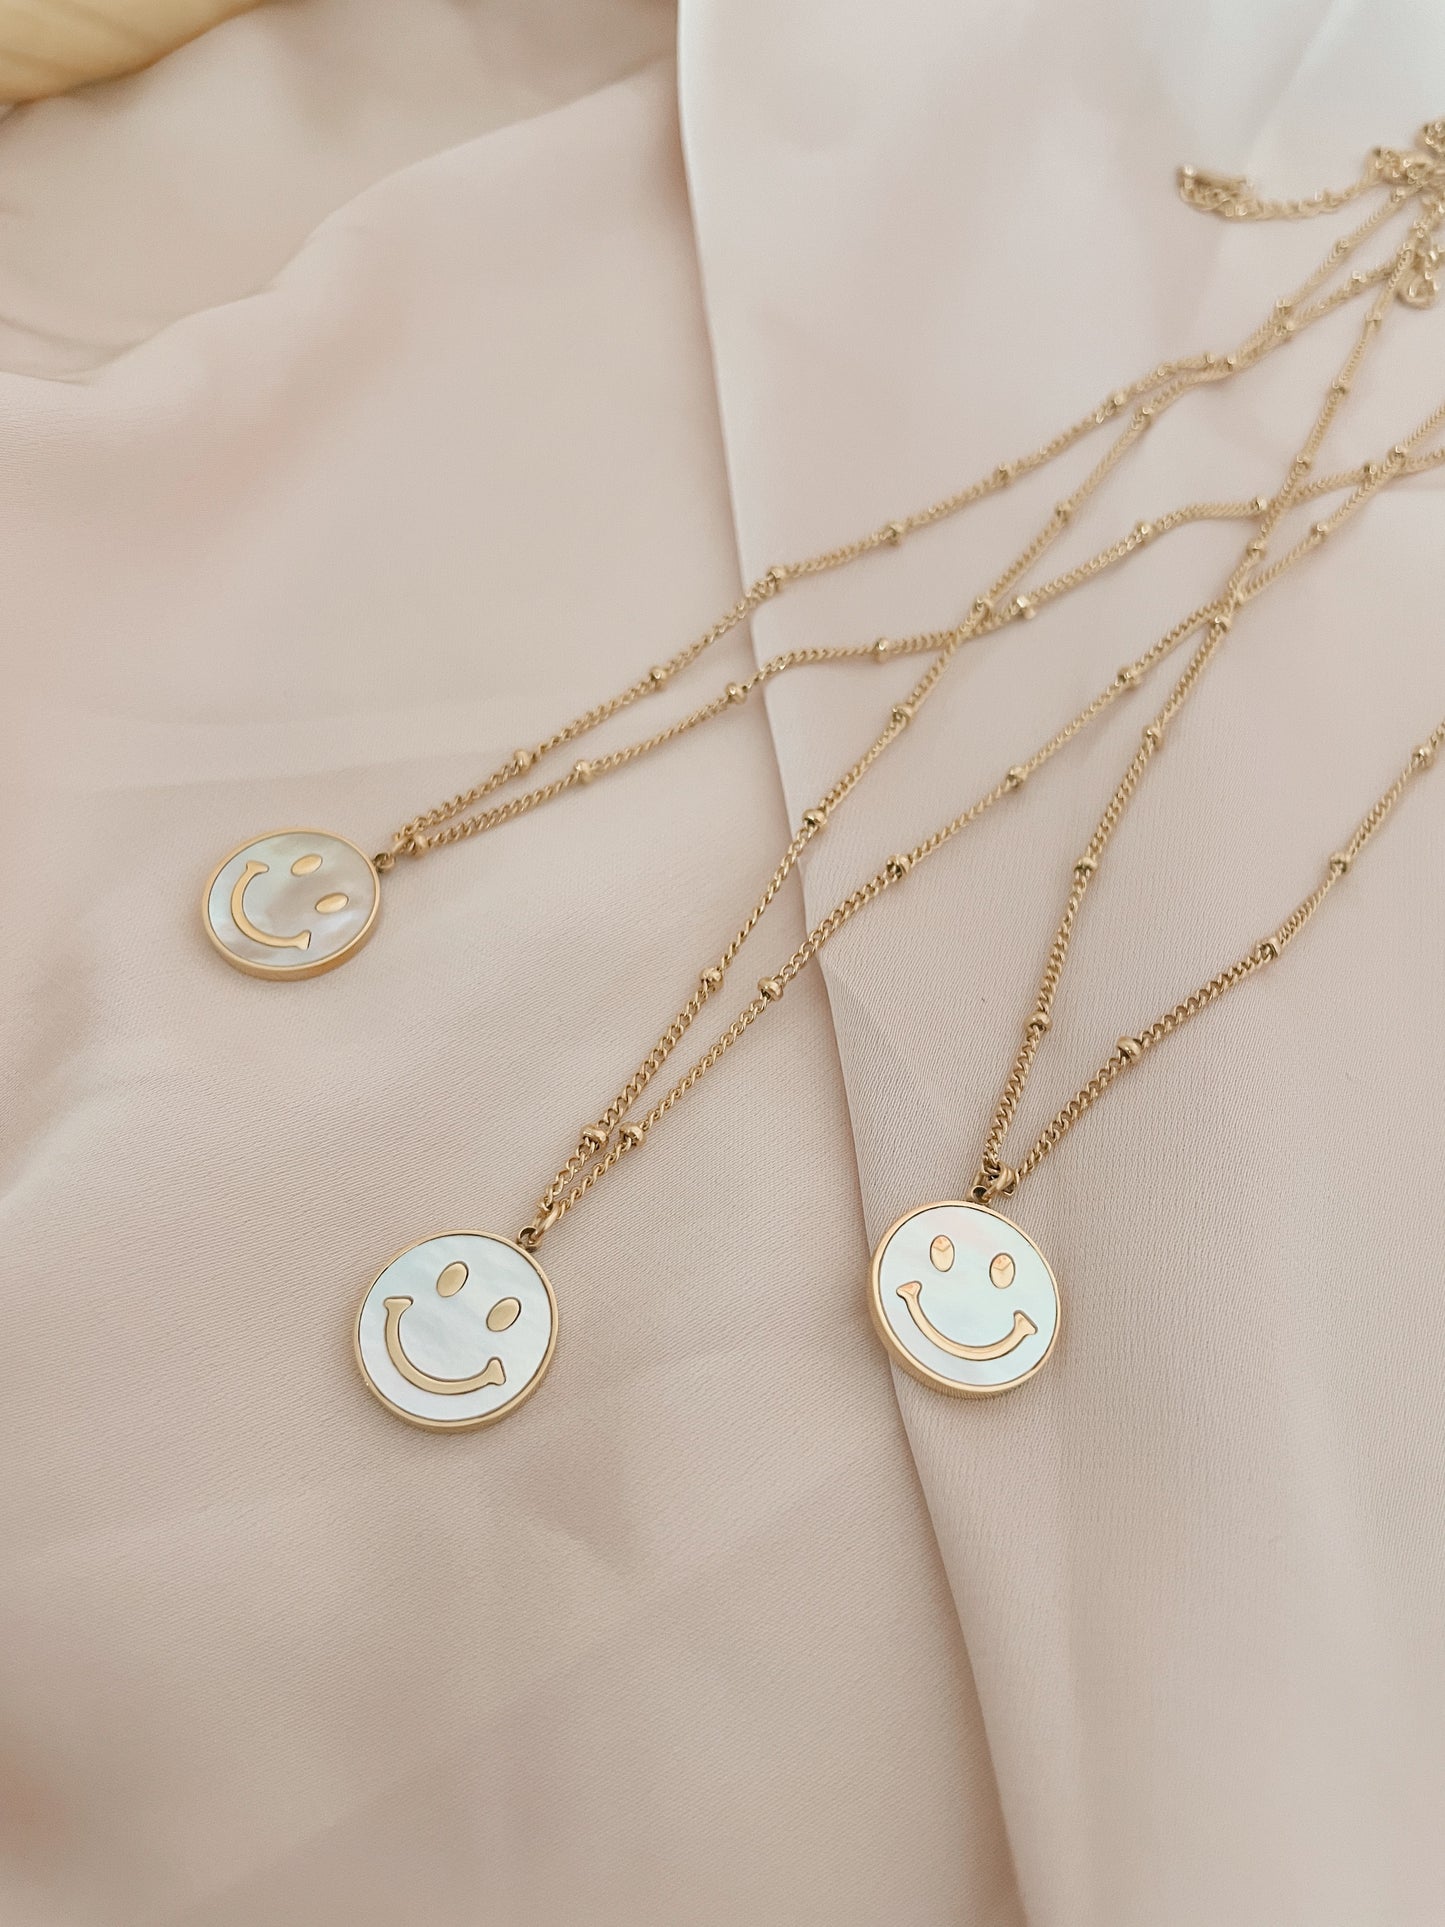 PEARL SMILEY - 18k gold plated necklace with pearl smiley charm